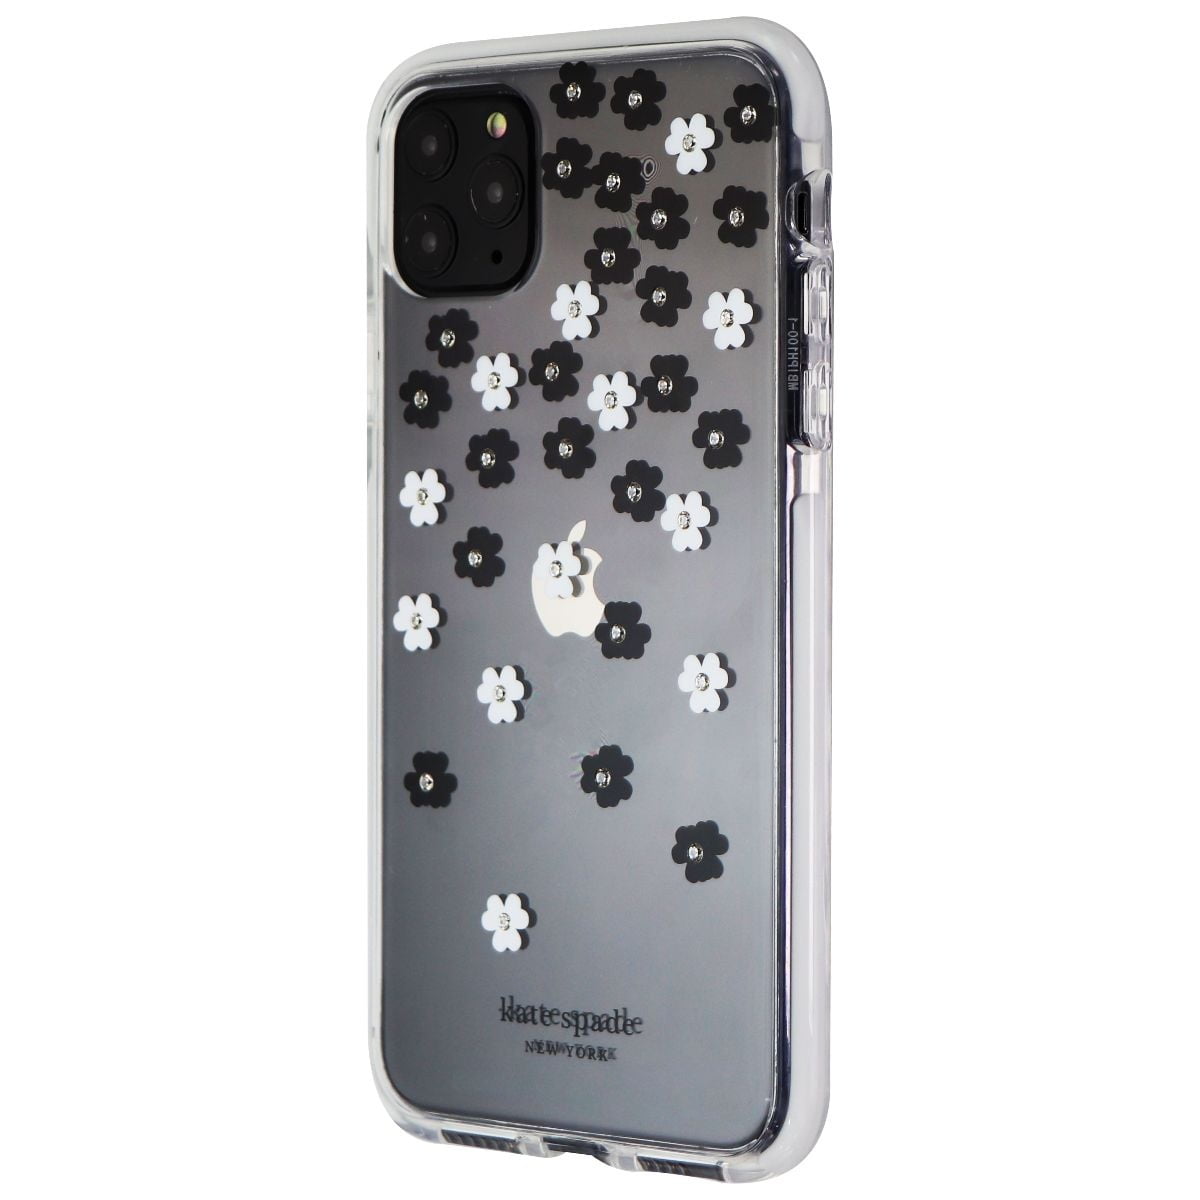 Kate Spade Defensive Hardshell Case for iPhone 11 Pro Max - Scattered